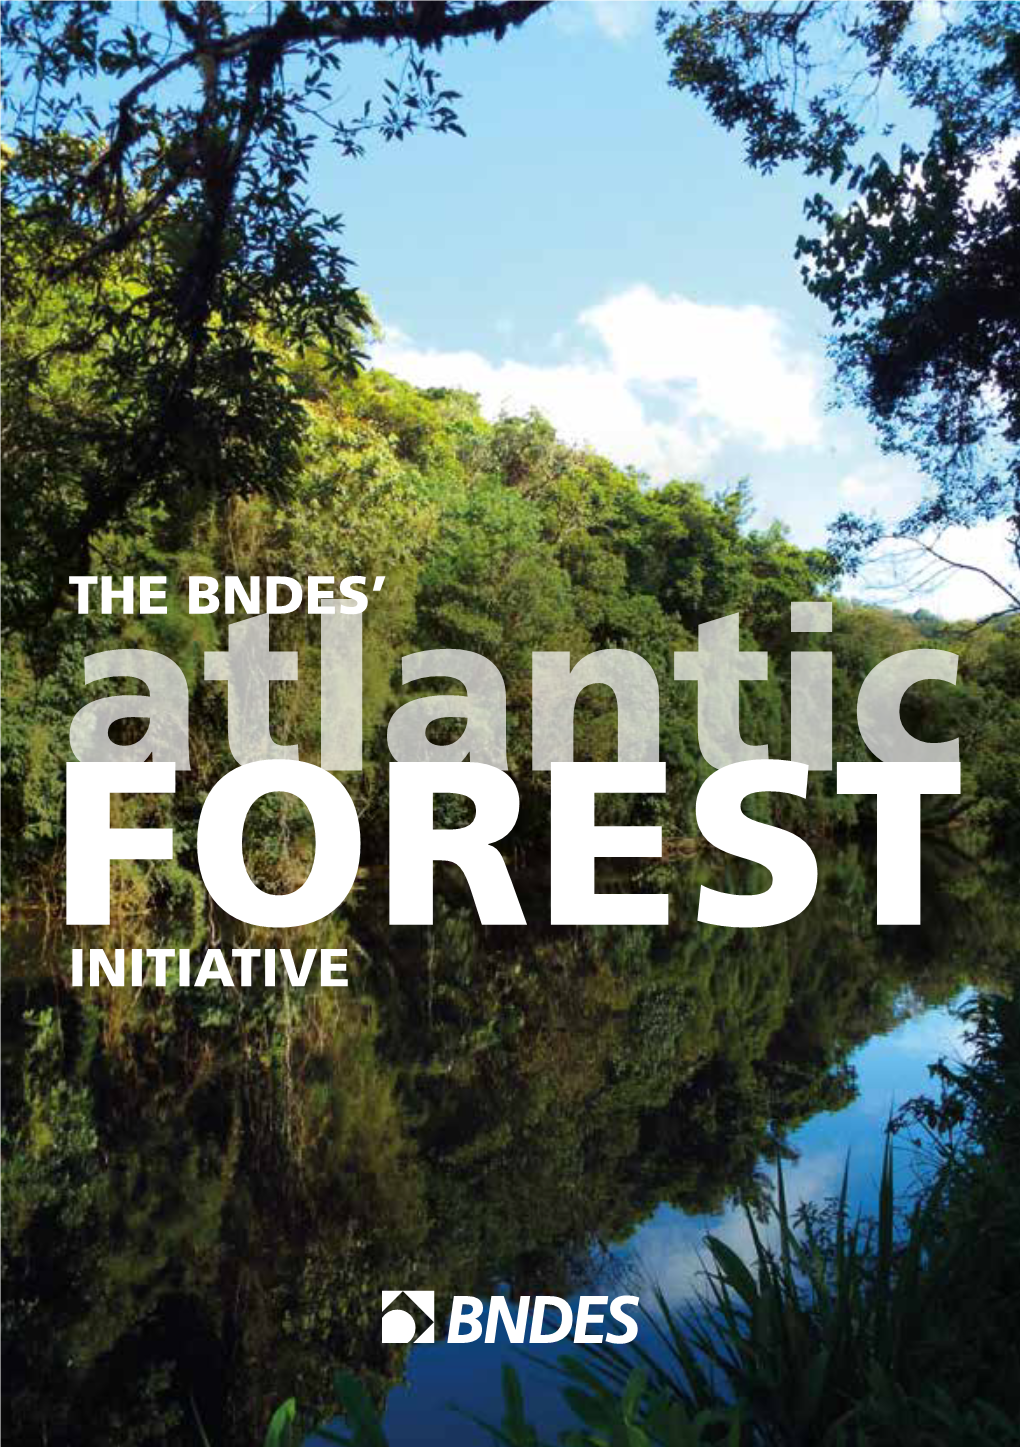 The Bndes' Initiative